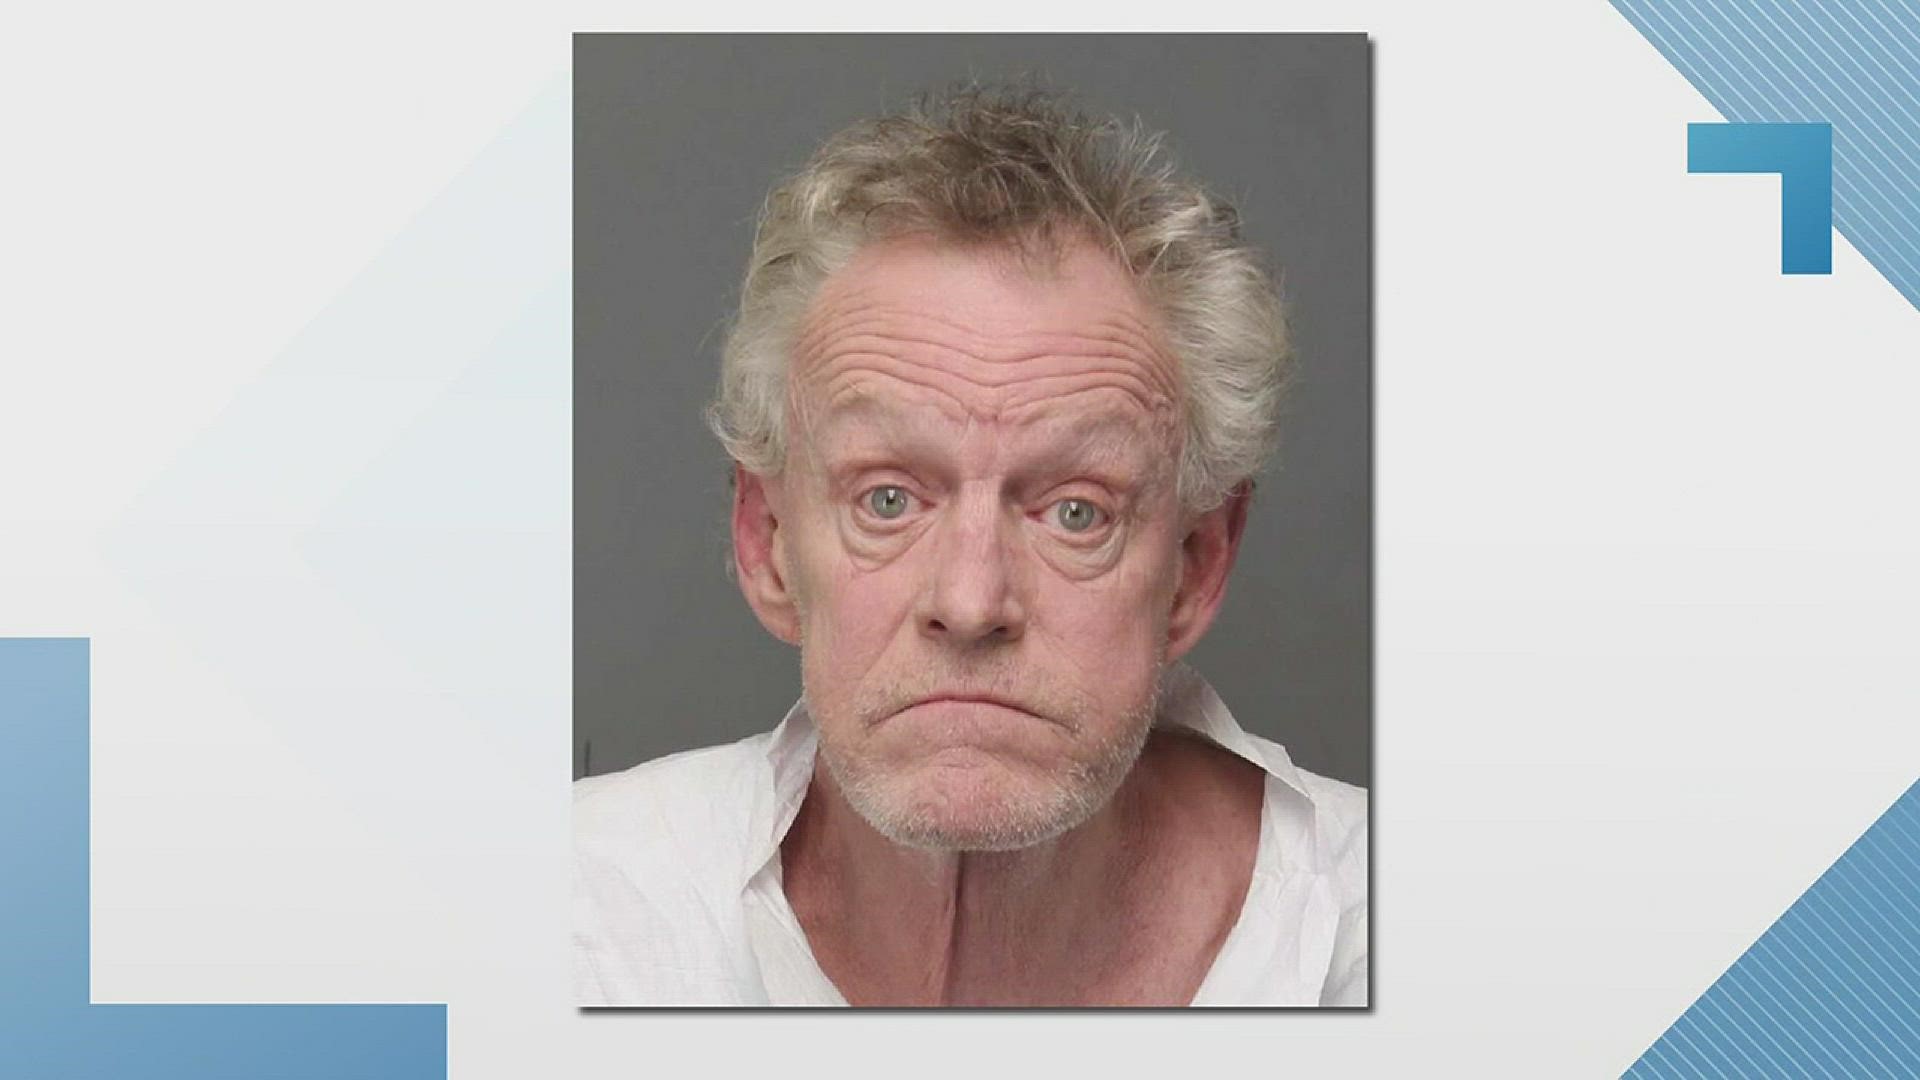 A man has been arrested in connection with the death of his wife after a shooting at a Lakewood apartment complex.